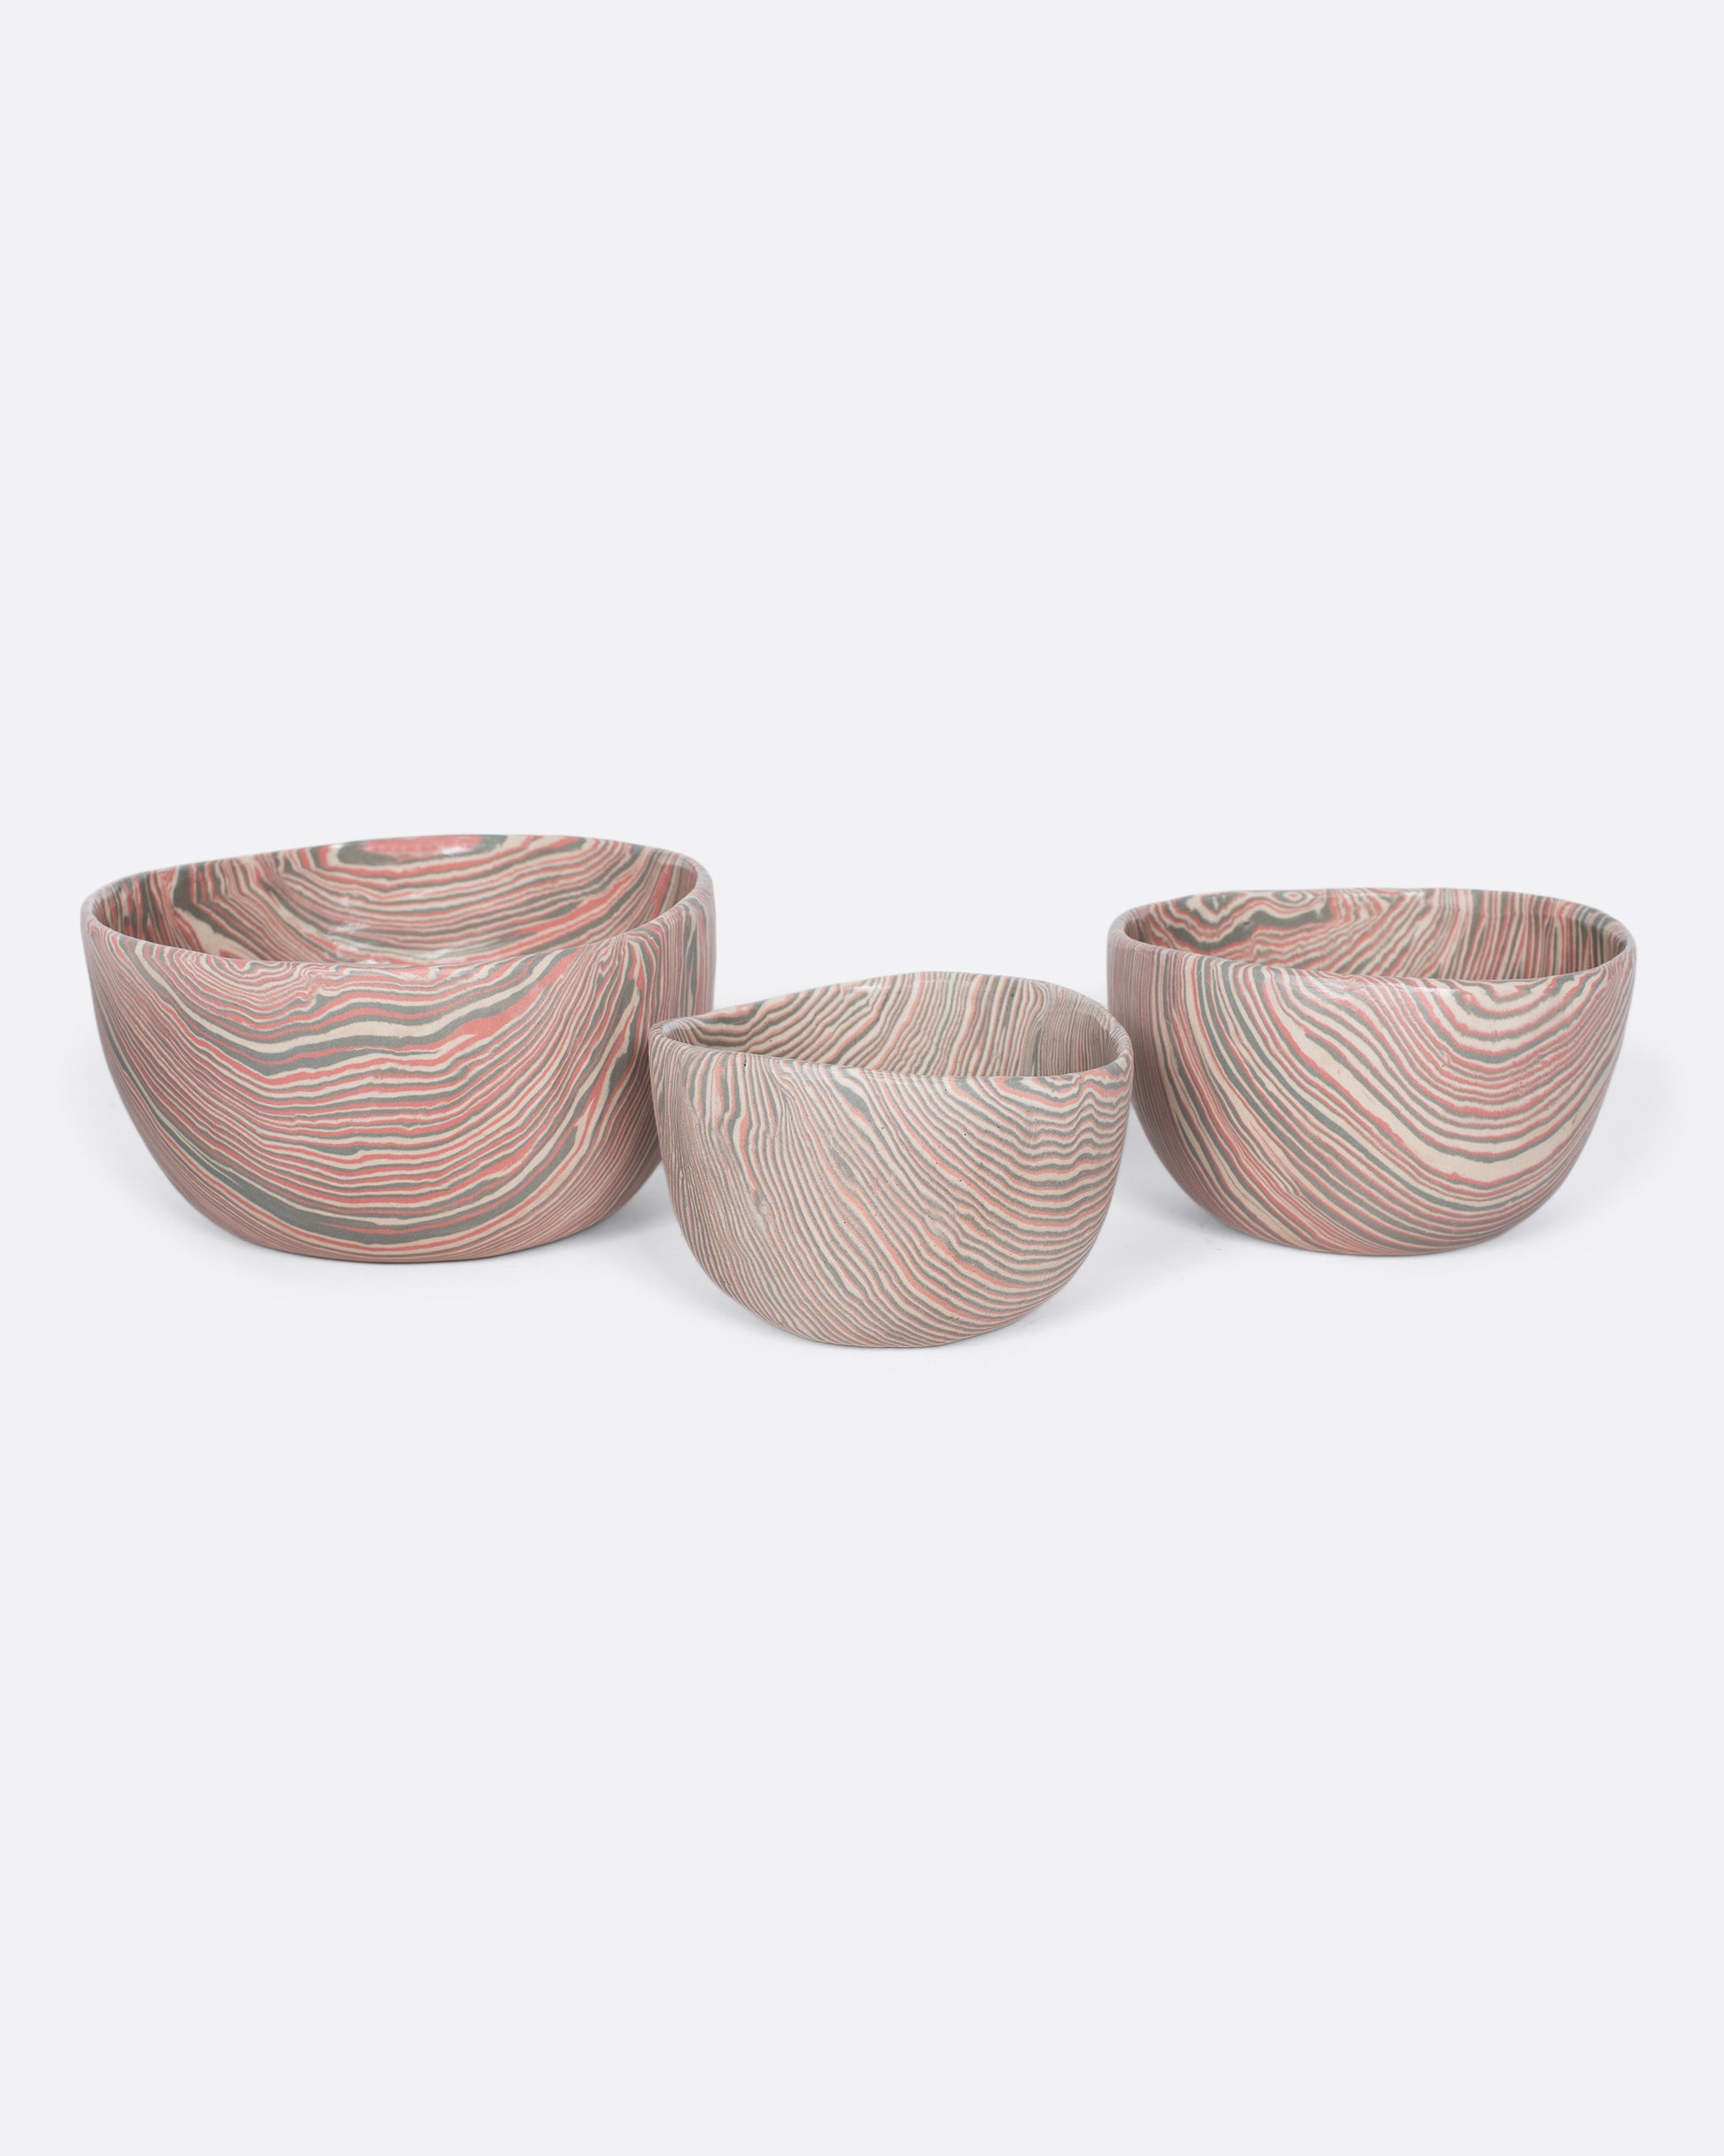 These small-batch ceramic bowls are made with a traditional Japanese nerikomi technique that creates an intricate, marbled design by layering and compressing clay. This timeless style feels plucked from desert sandstone with flowing hues of pink, white, and grey. Available in small, medium, and large sizes.